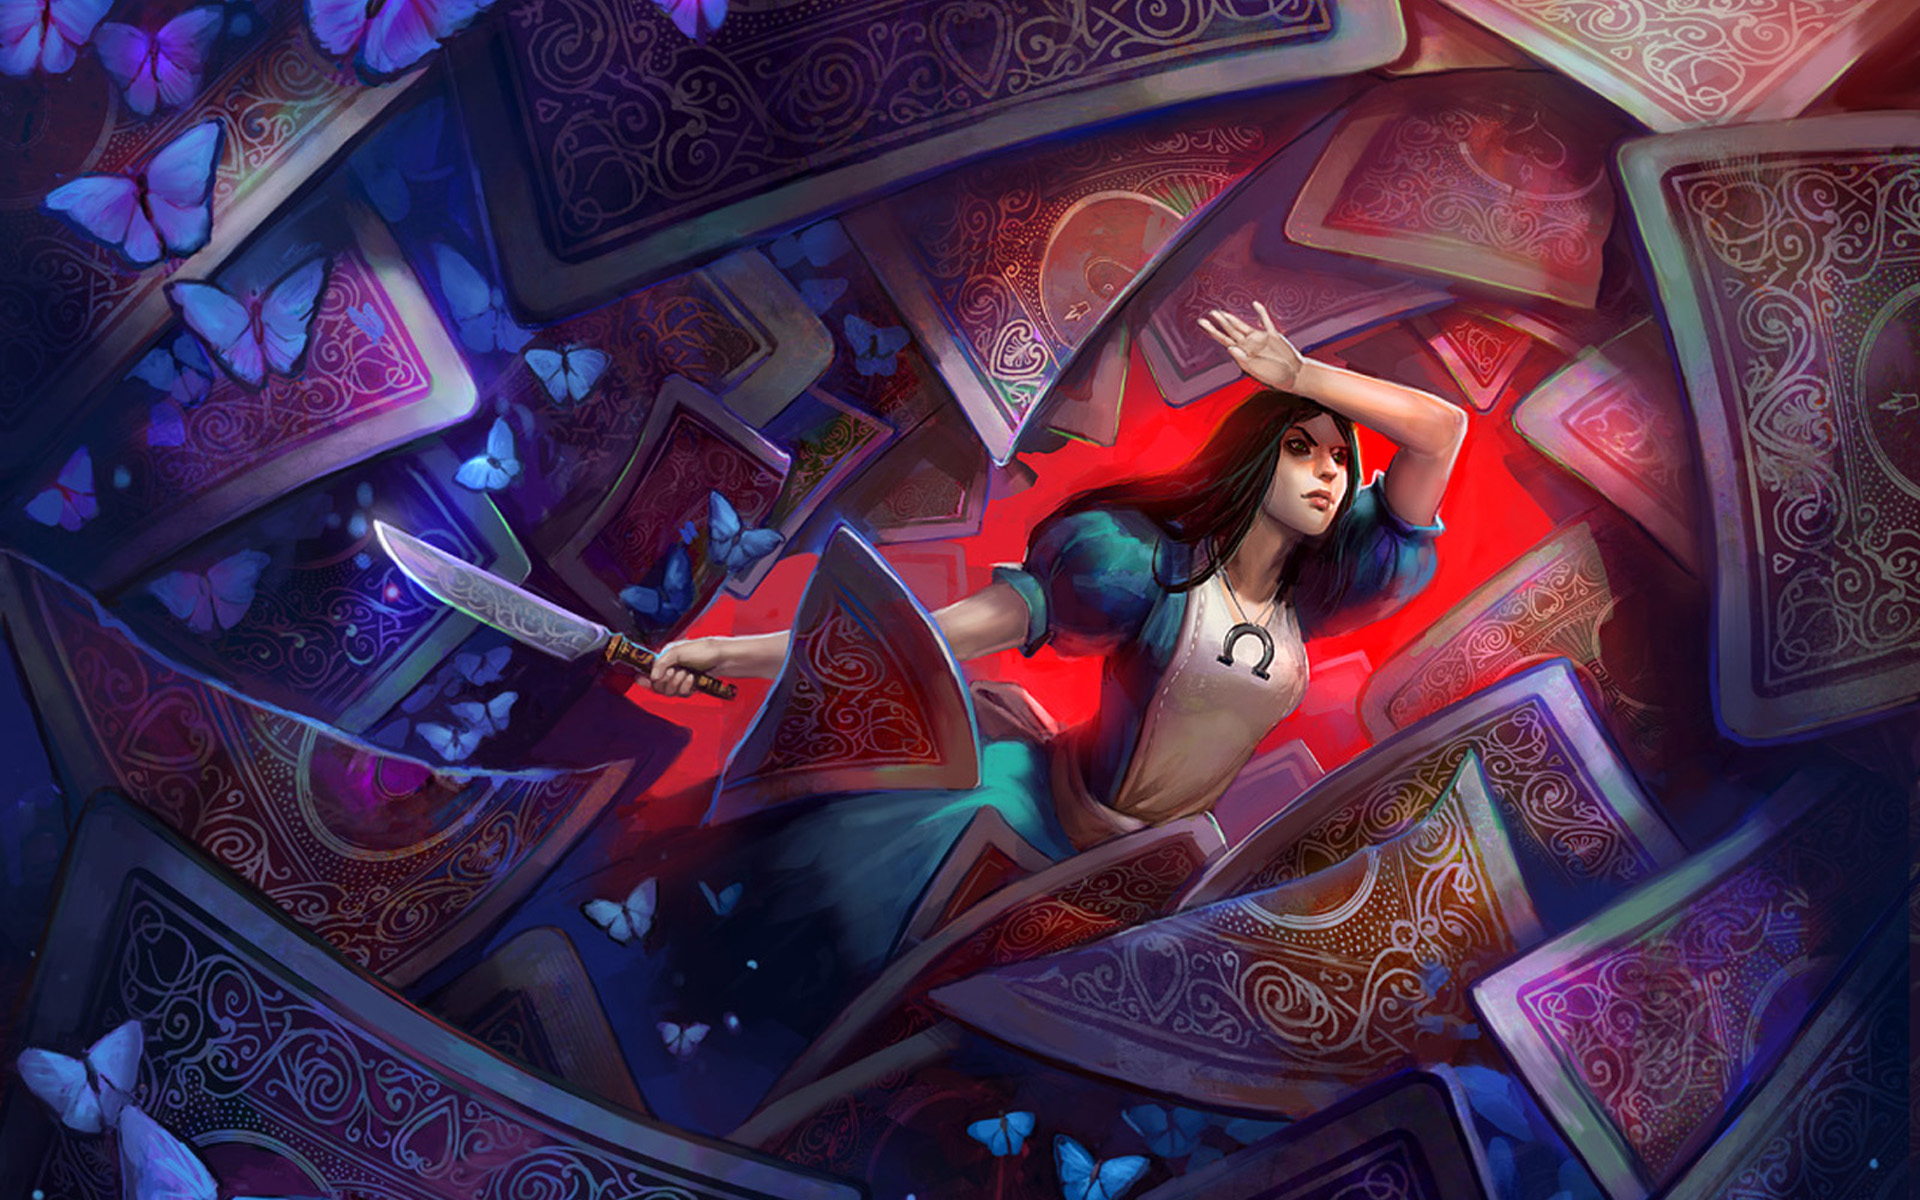 Alice Cuts the Deck by Julie Dillon